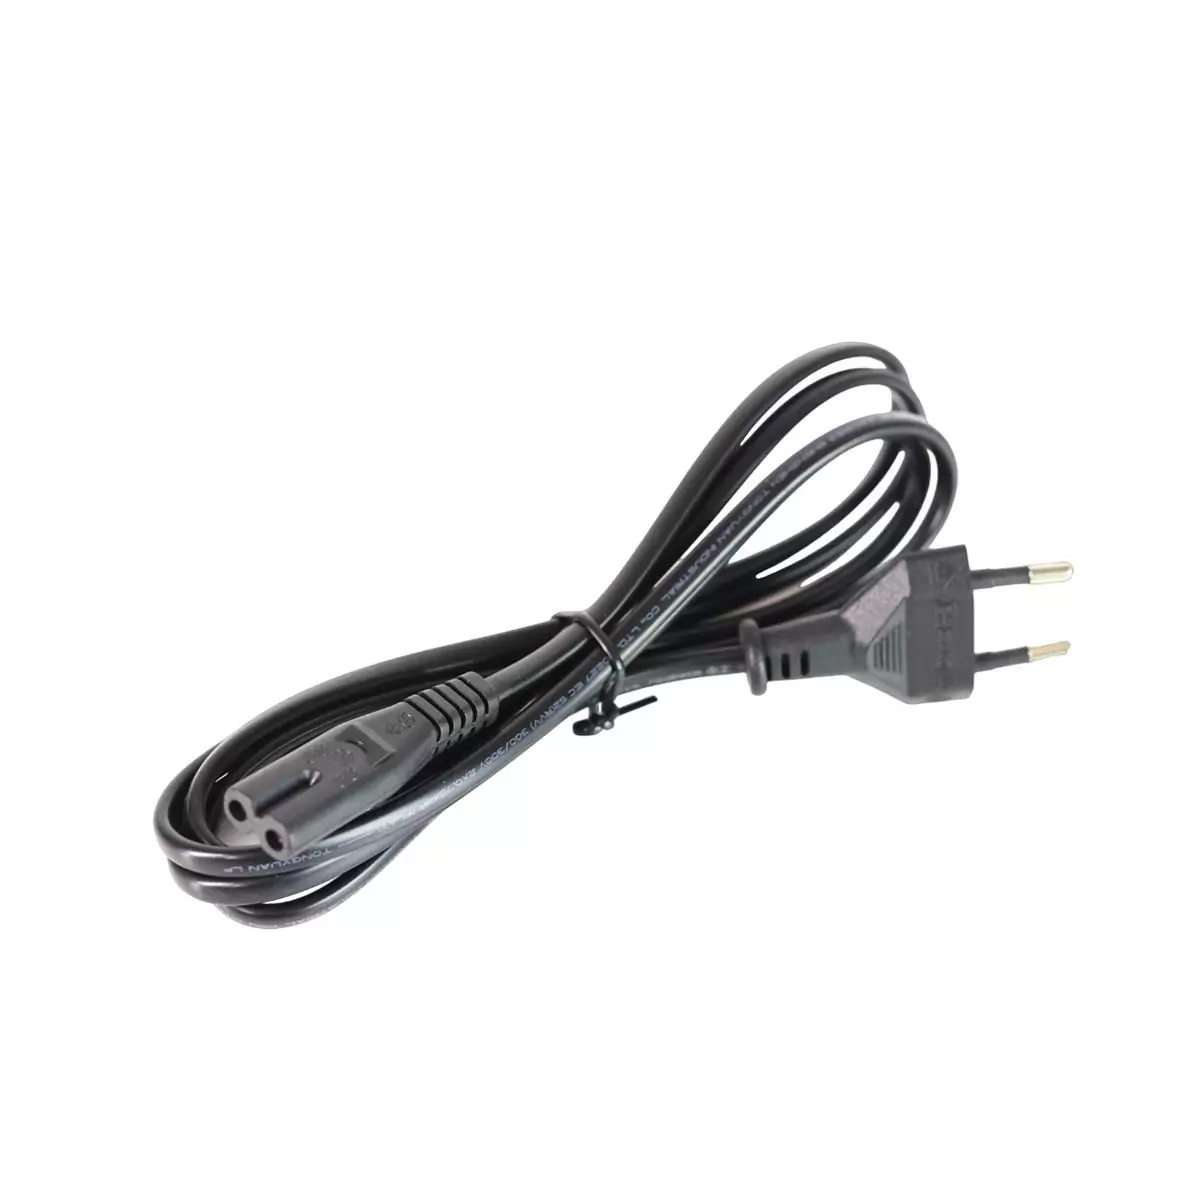 European mains power cable 4A battery charger for XF1, XF2, XF3 with Simplo and ISSIMO battery - image